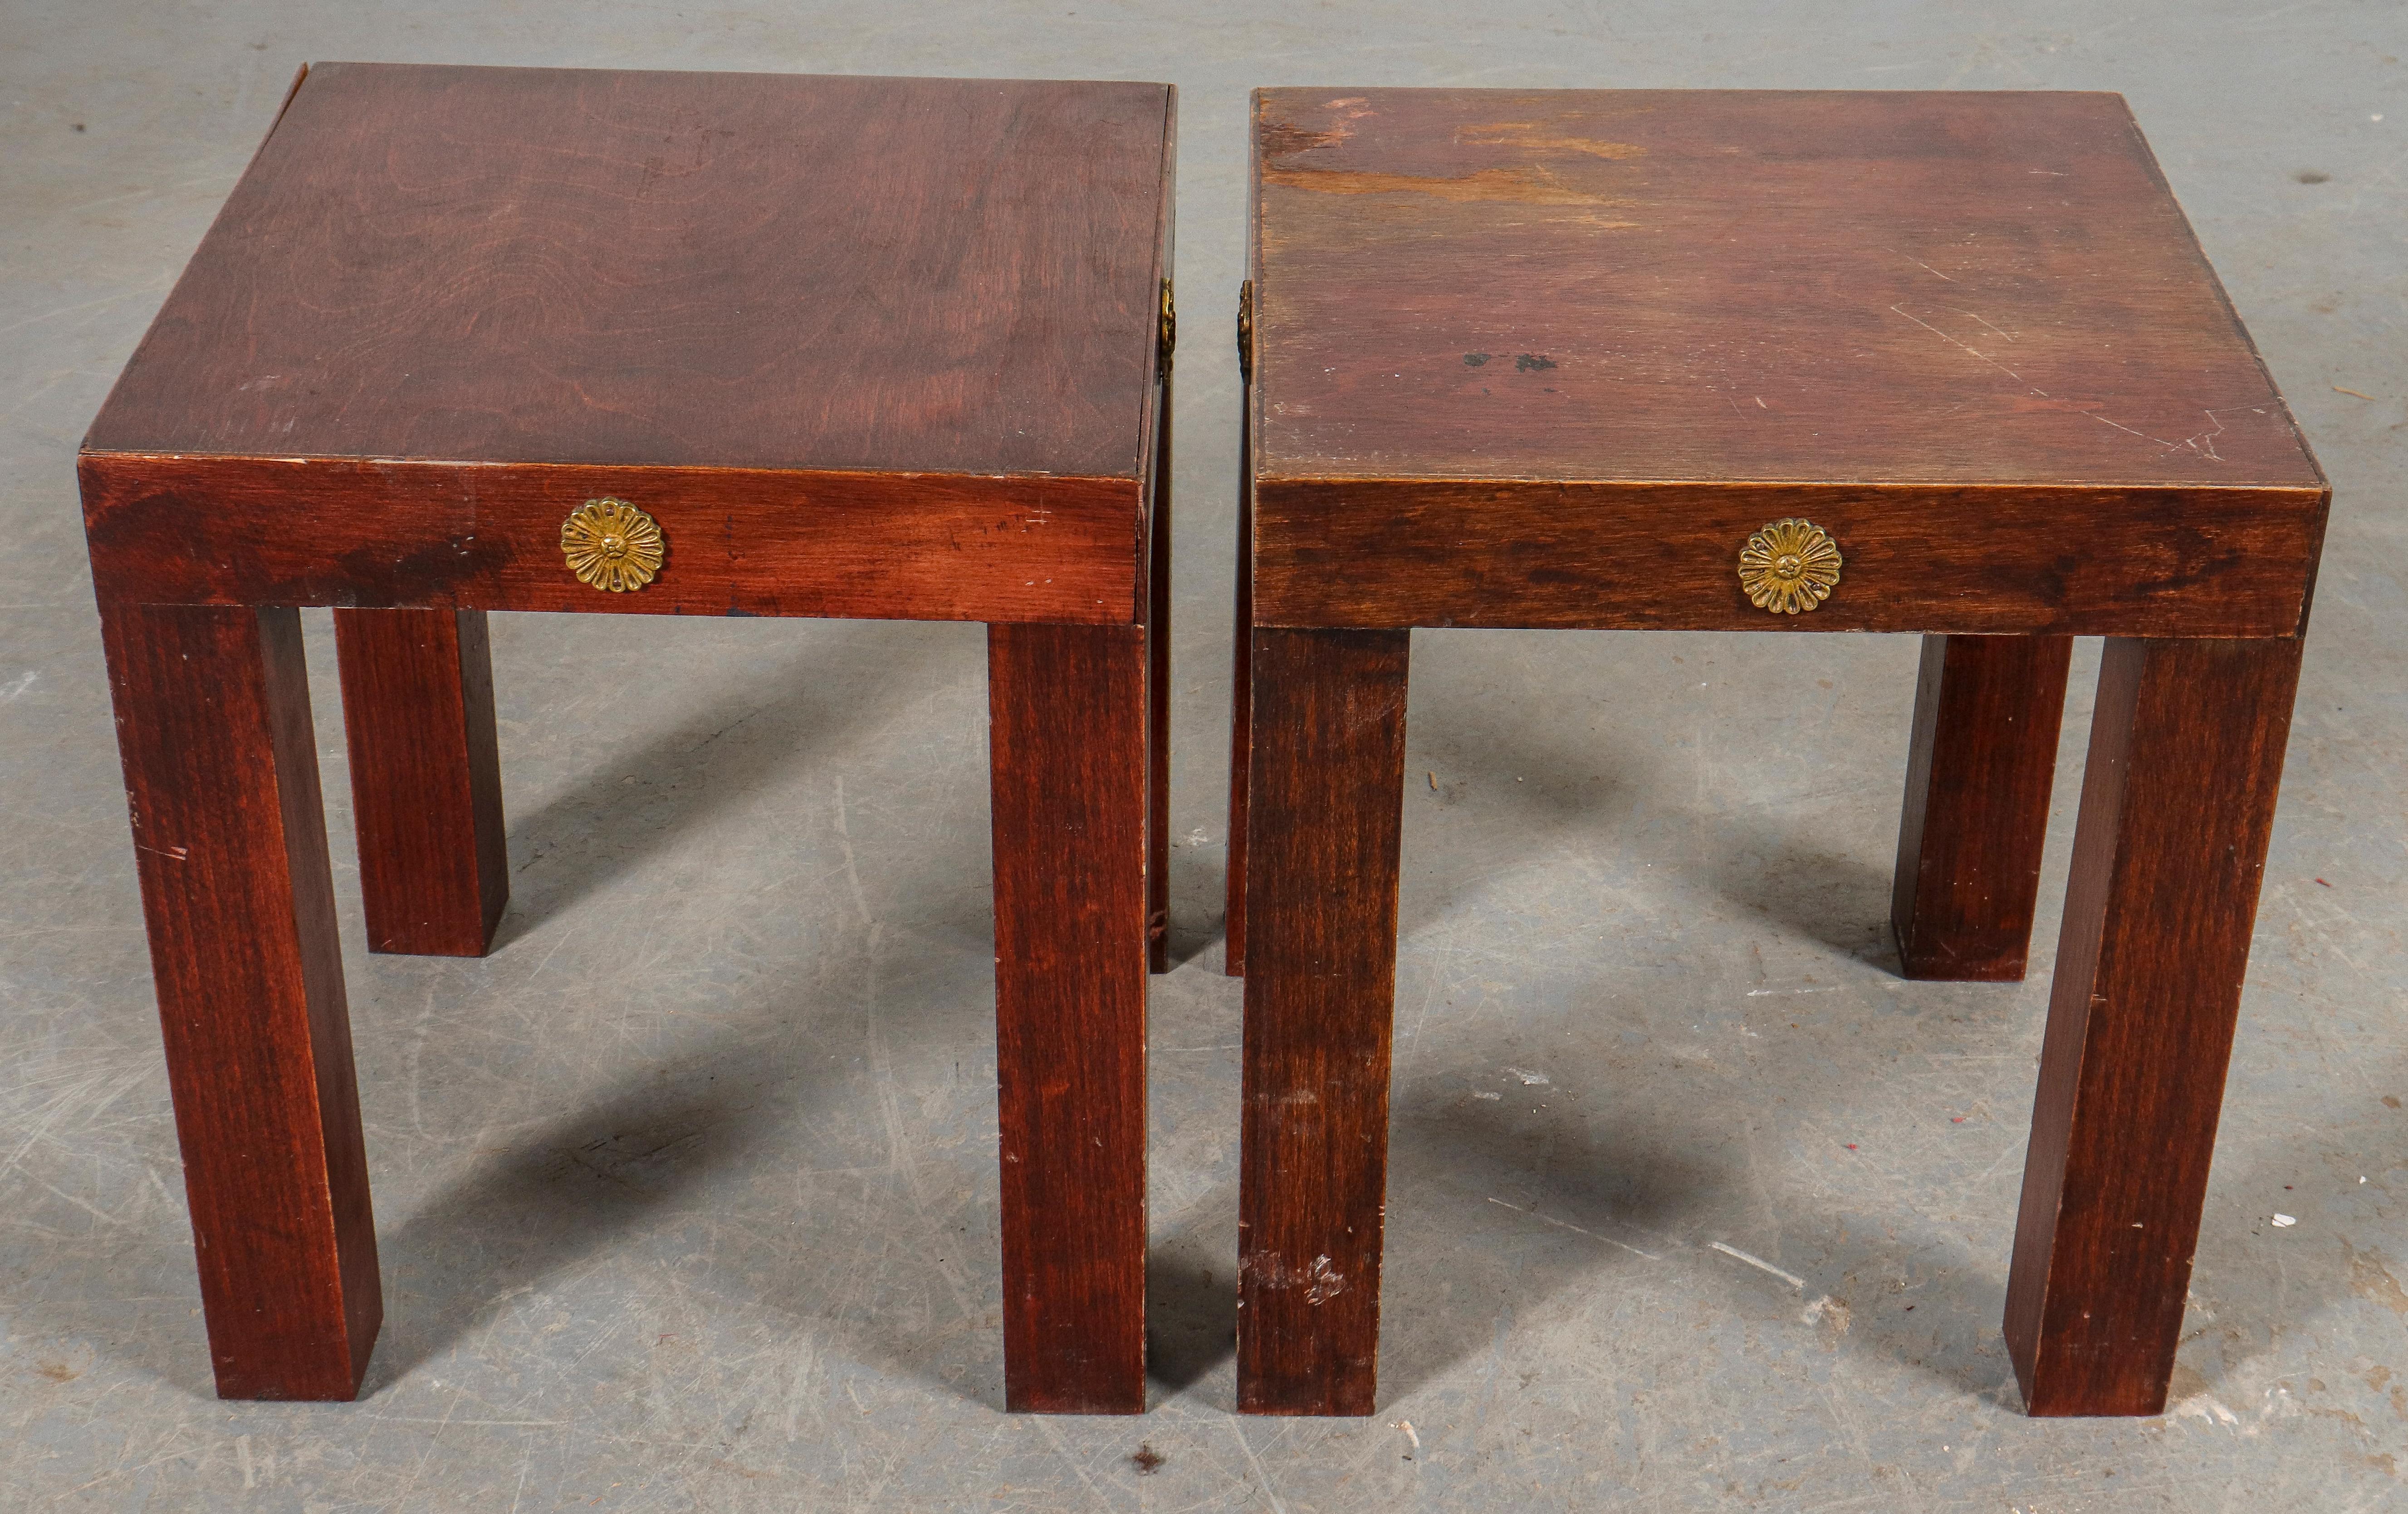 Empire Revival pair of diminutive wood pedestal tables or side tables with gilt metal embellishment. Measures: 16